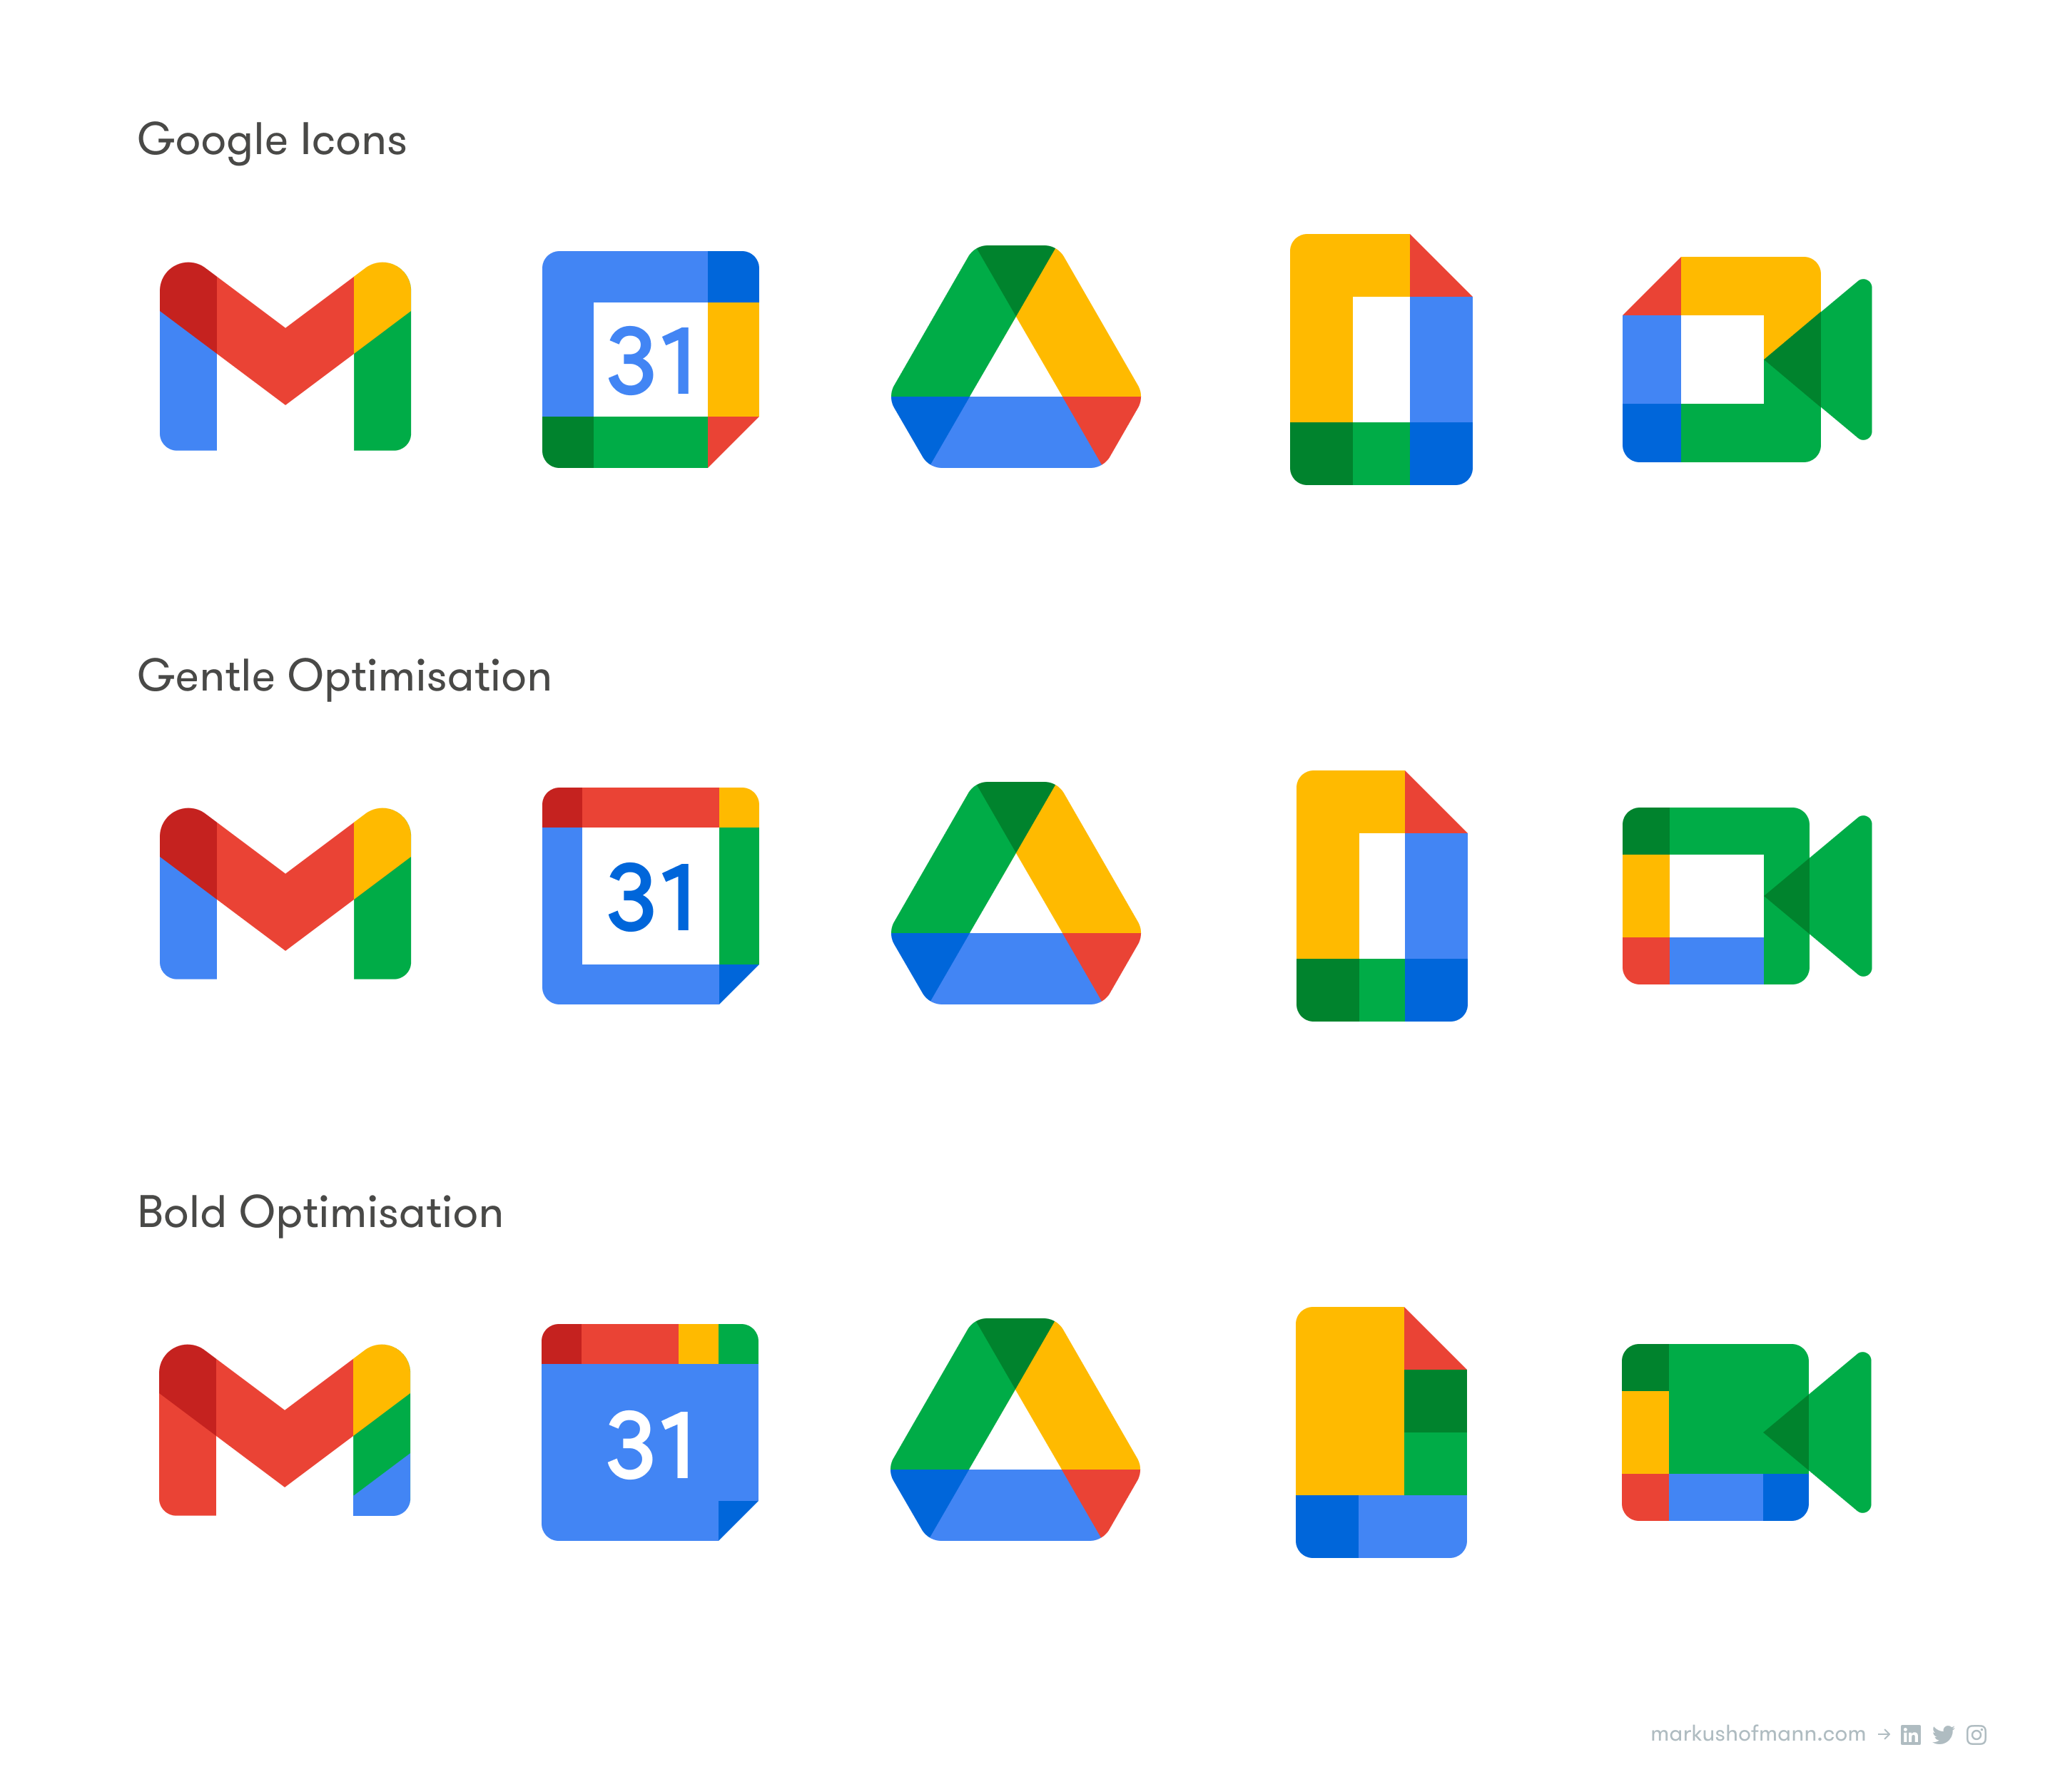 Comparison of Google’s new Workplace icons and my gently optimised as well as bold, more distinct versions